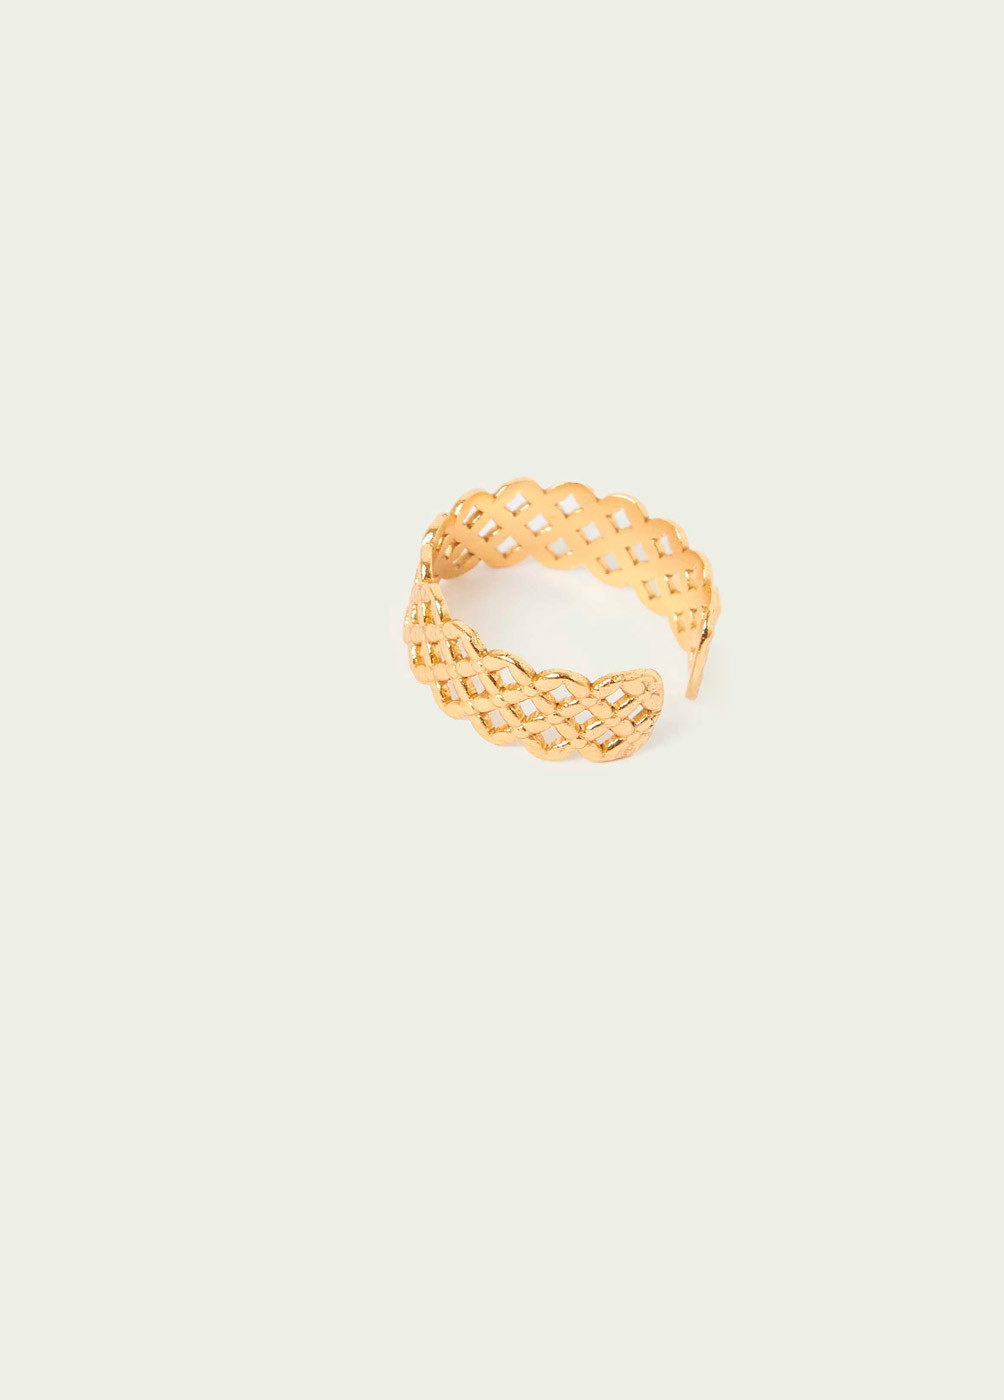 CHAIN-STYLE RING